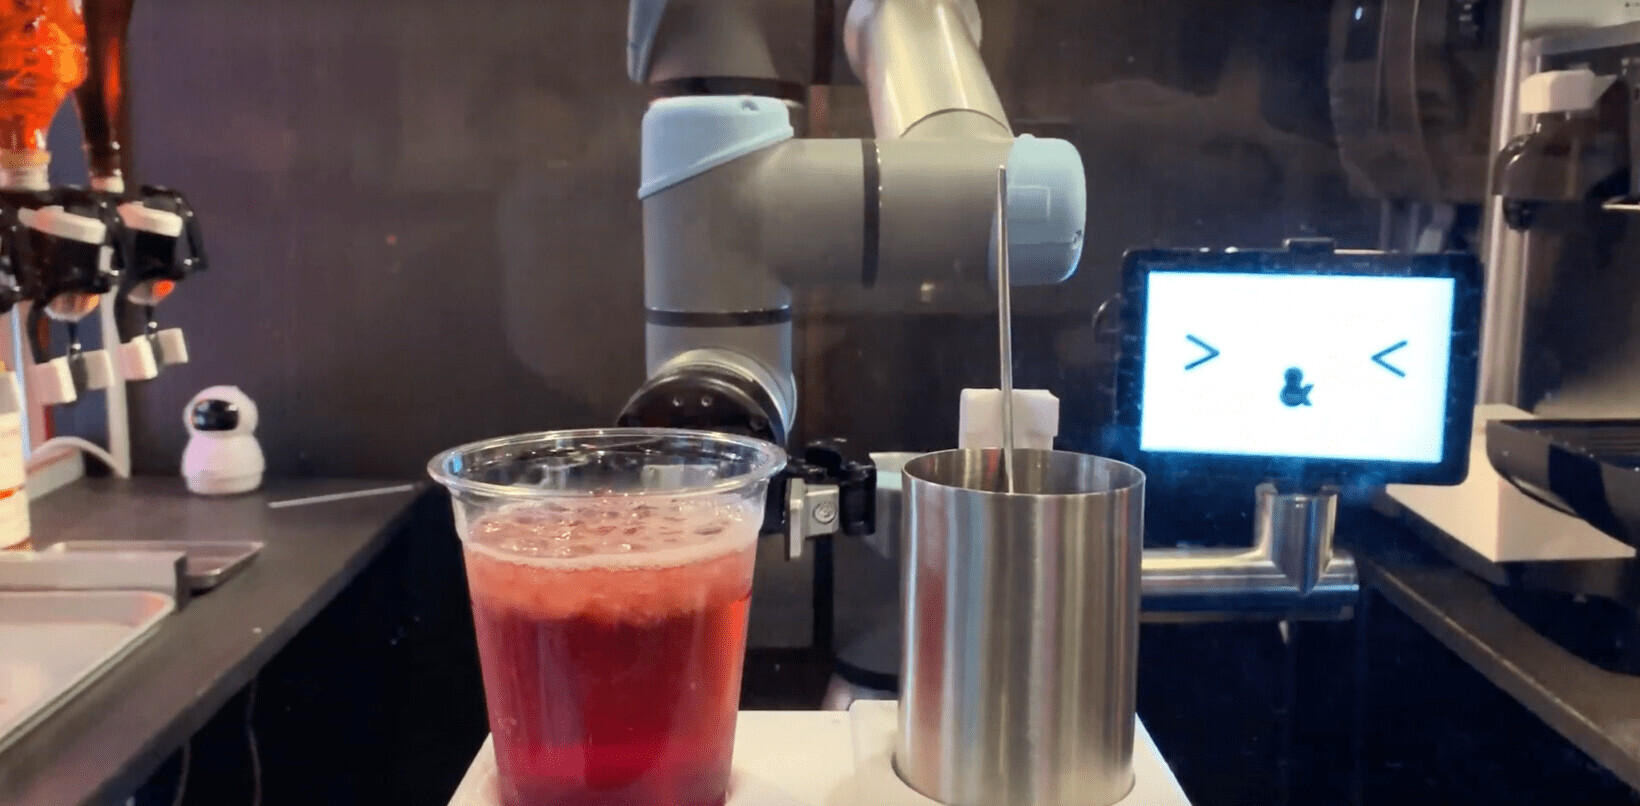 Bartenders watch out: A robot server in Tokyo can make cocktails in one minute